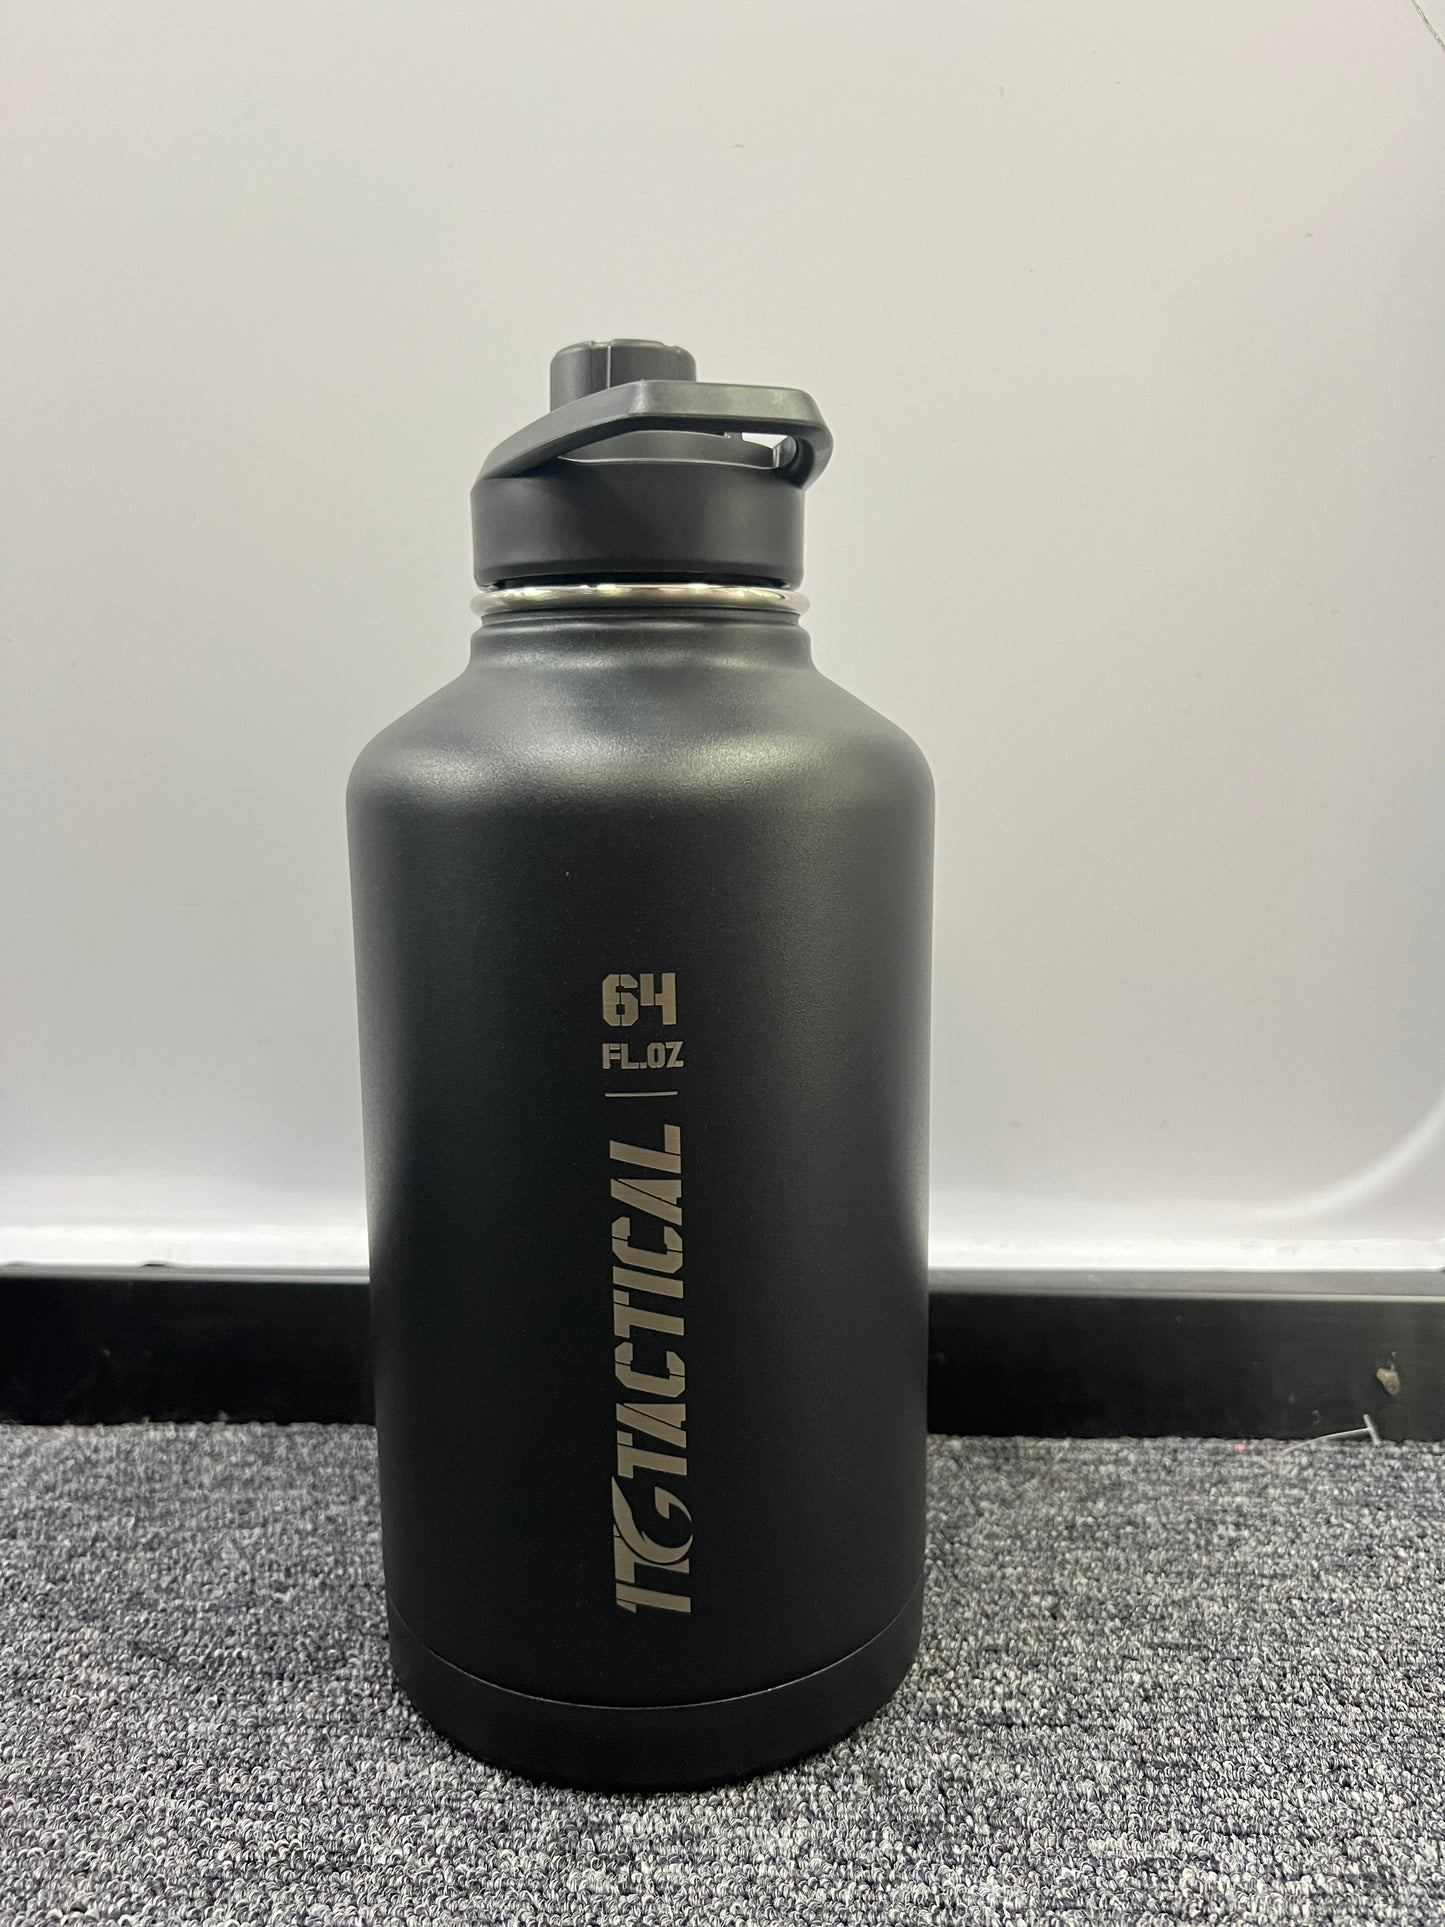 1TG Tactical 64 oz Insulated Stainless Steel Water Jug - Black